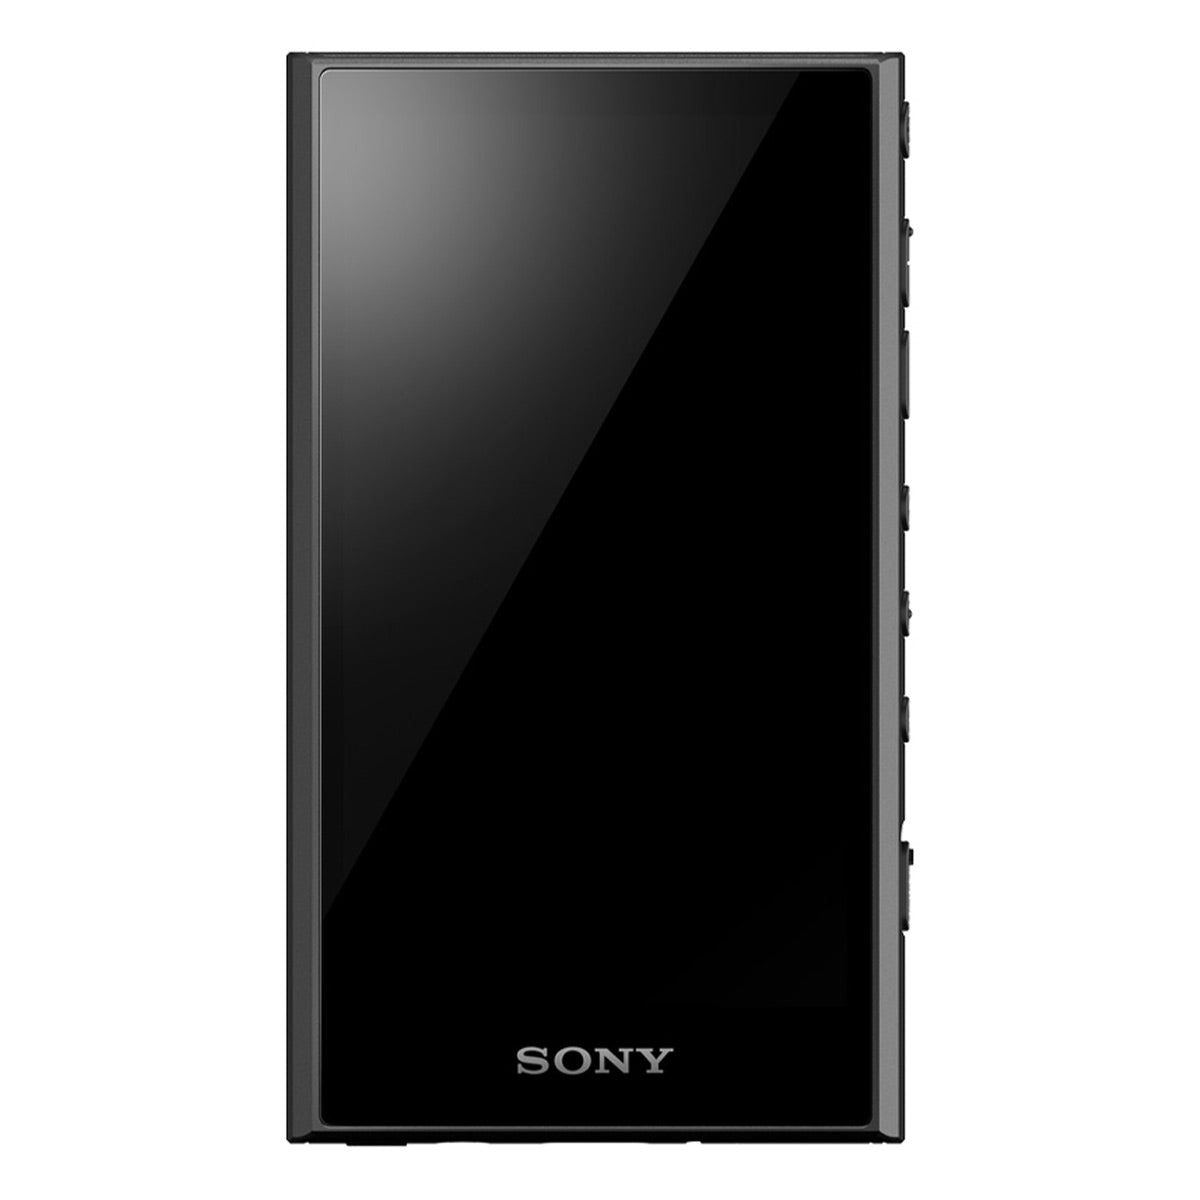 Sony NW-A306 Walkman A Series Hi-Res Digital Music Player with 